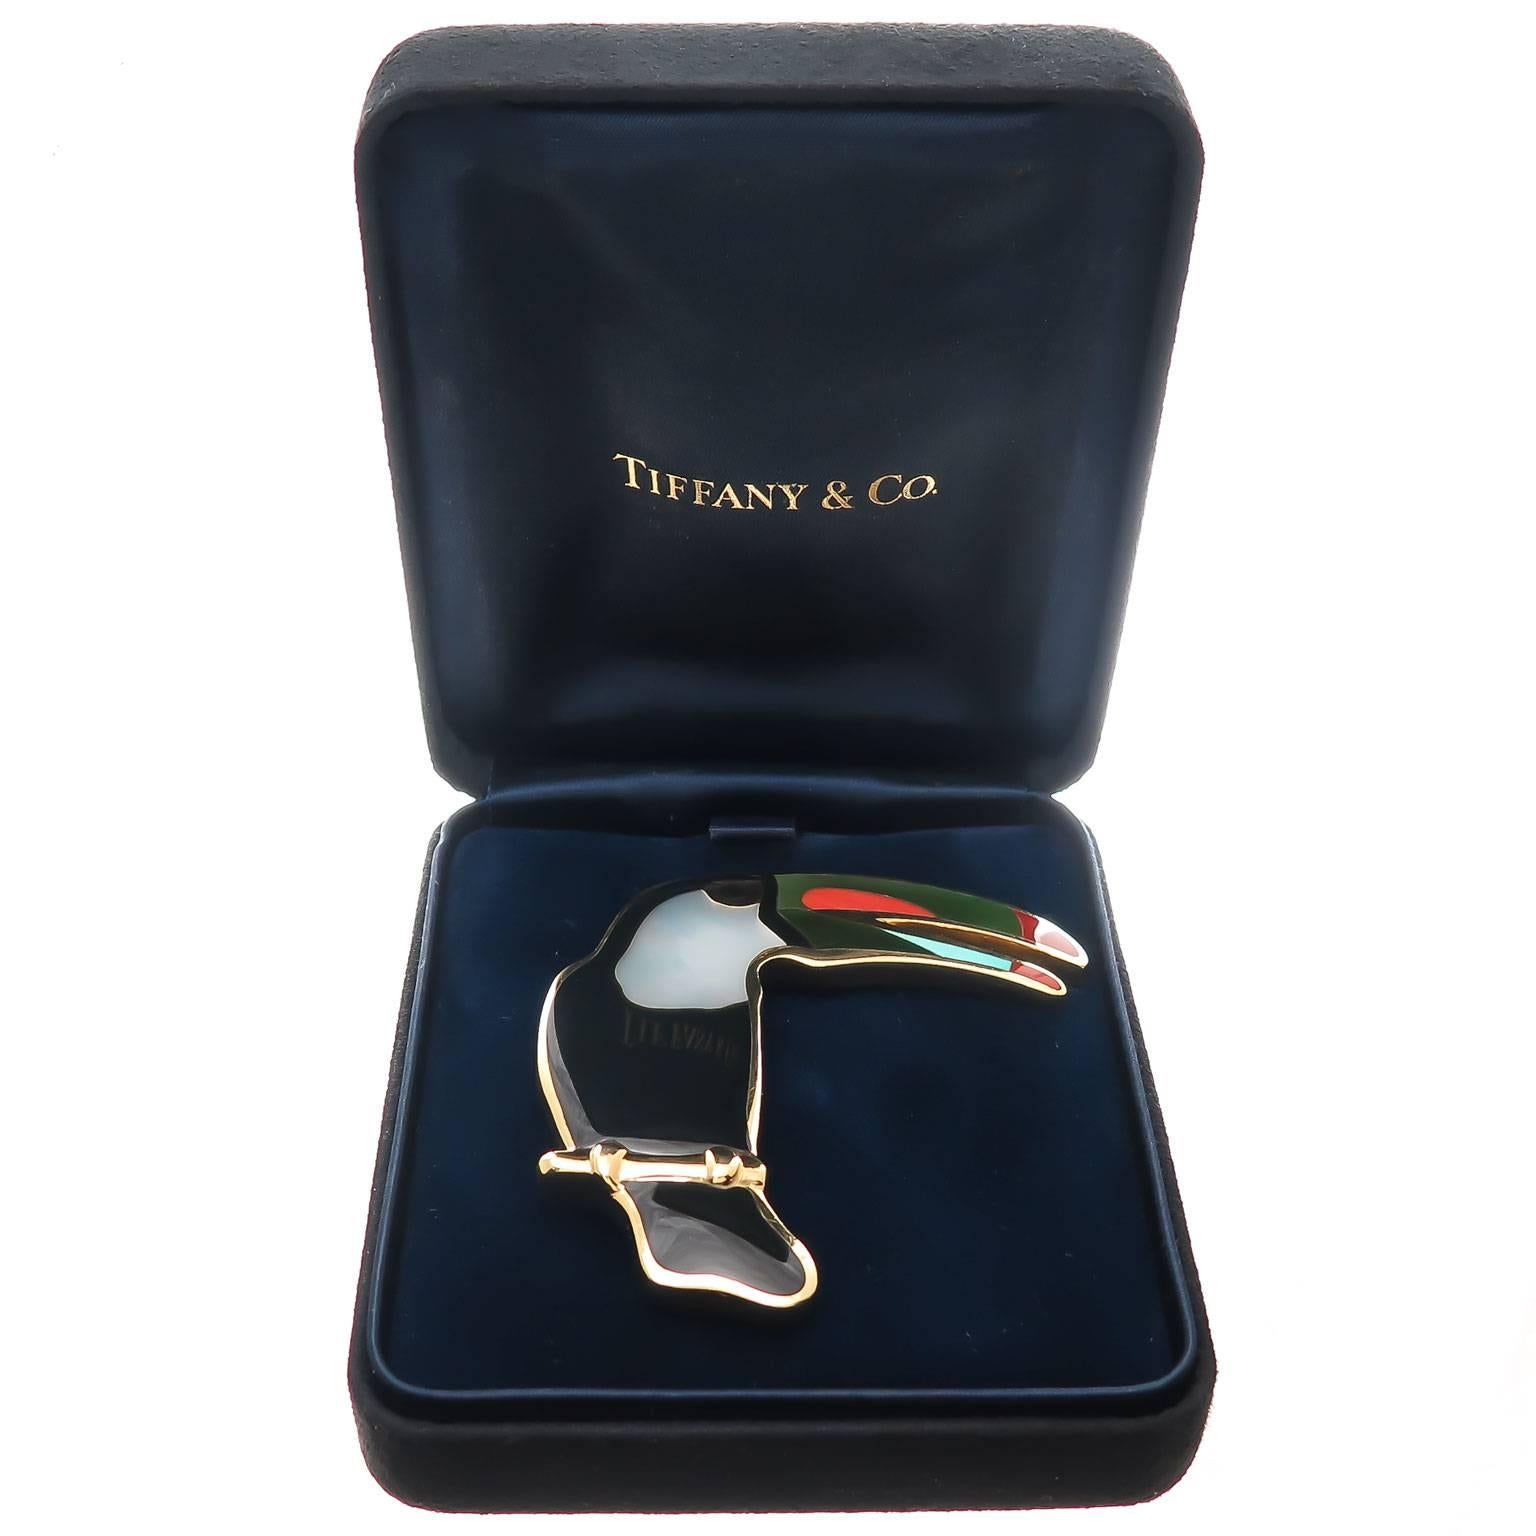 Circa 1980 Tiffany & Company 18K Yellow Gold Toucan Bird Brooch, measuring 2 1/2 inch in height and 2 1/2 inch in width. Inlaid with Mother of Pearl, Onyx, Coral, Turquoise and Jade. Nice heavy solid construction with a double clip pin. Comes in